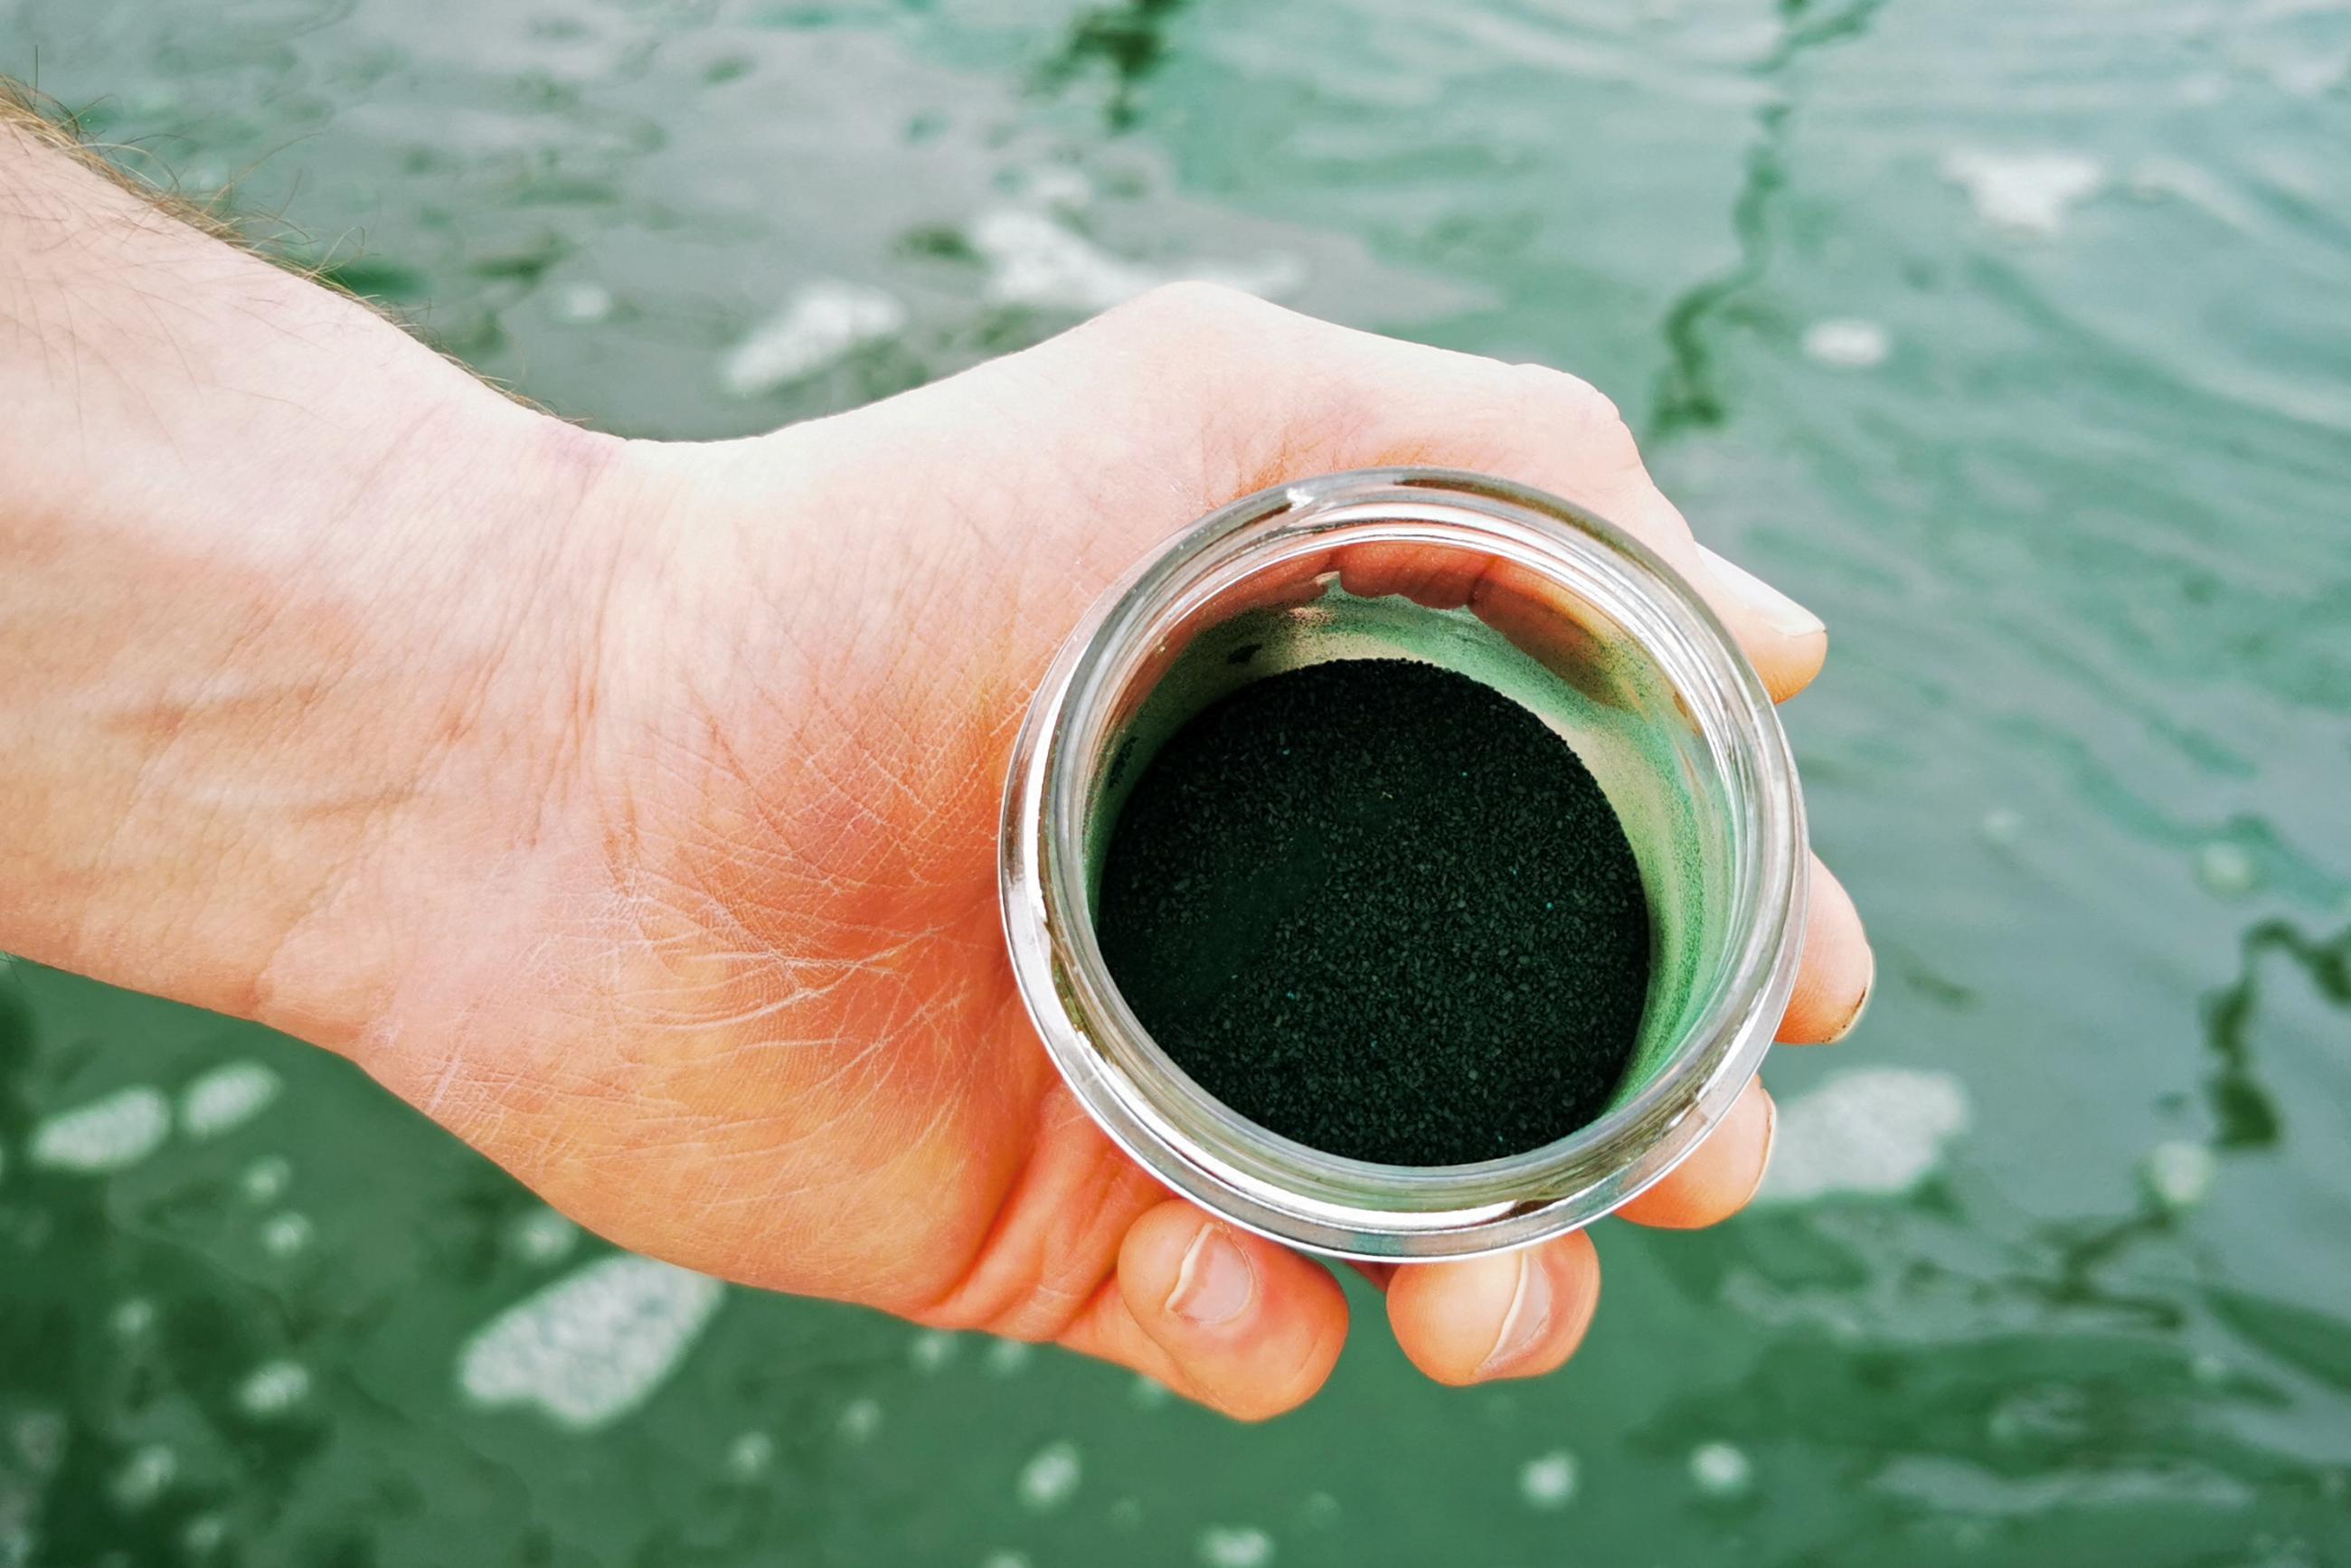 Man shows a powdered form of spirulina algae in a clear plastic cup in his hand.